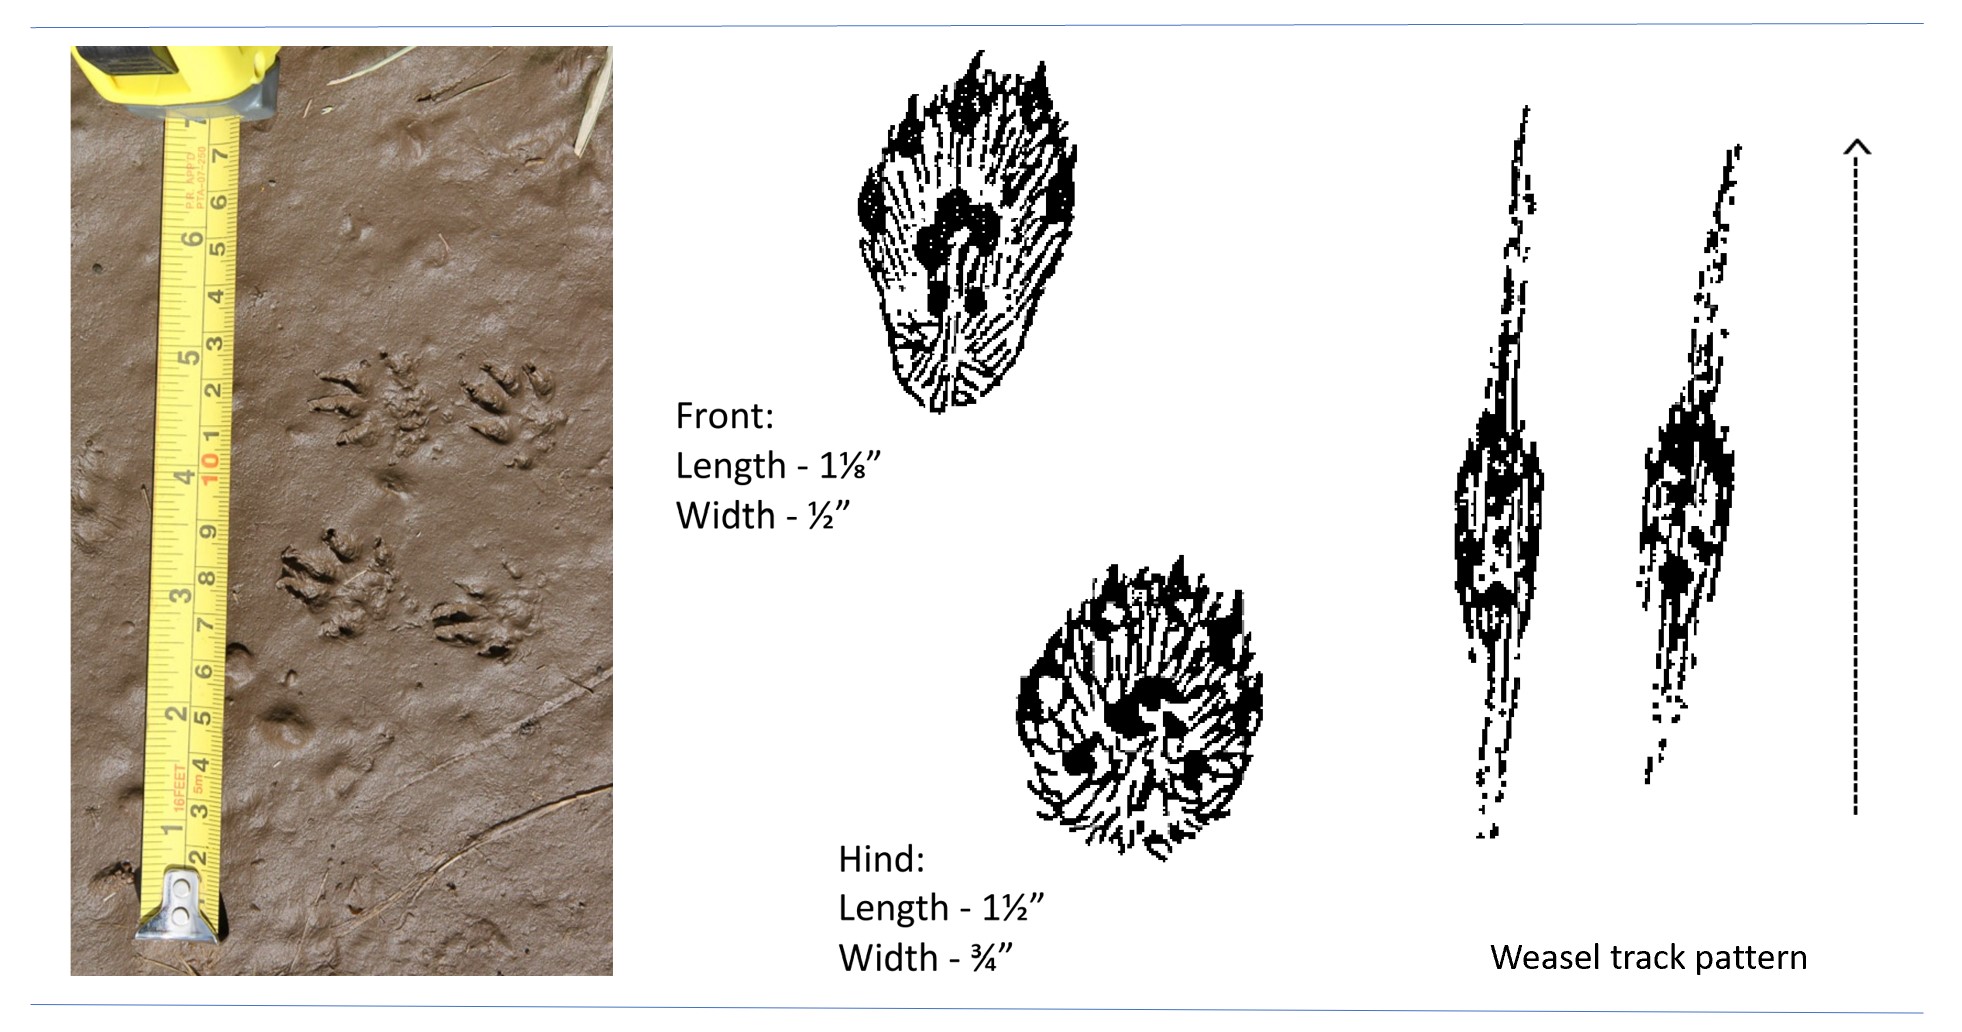 Photo and illustrations of weasel tracks.